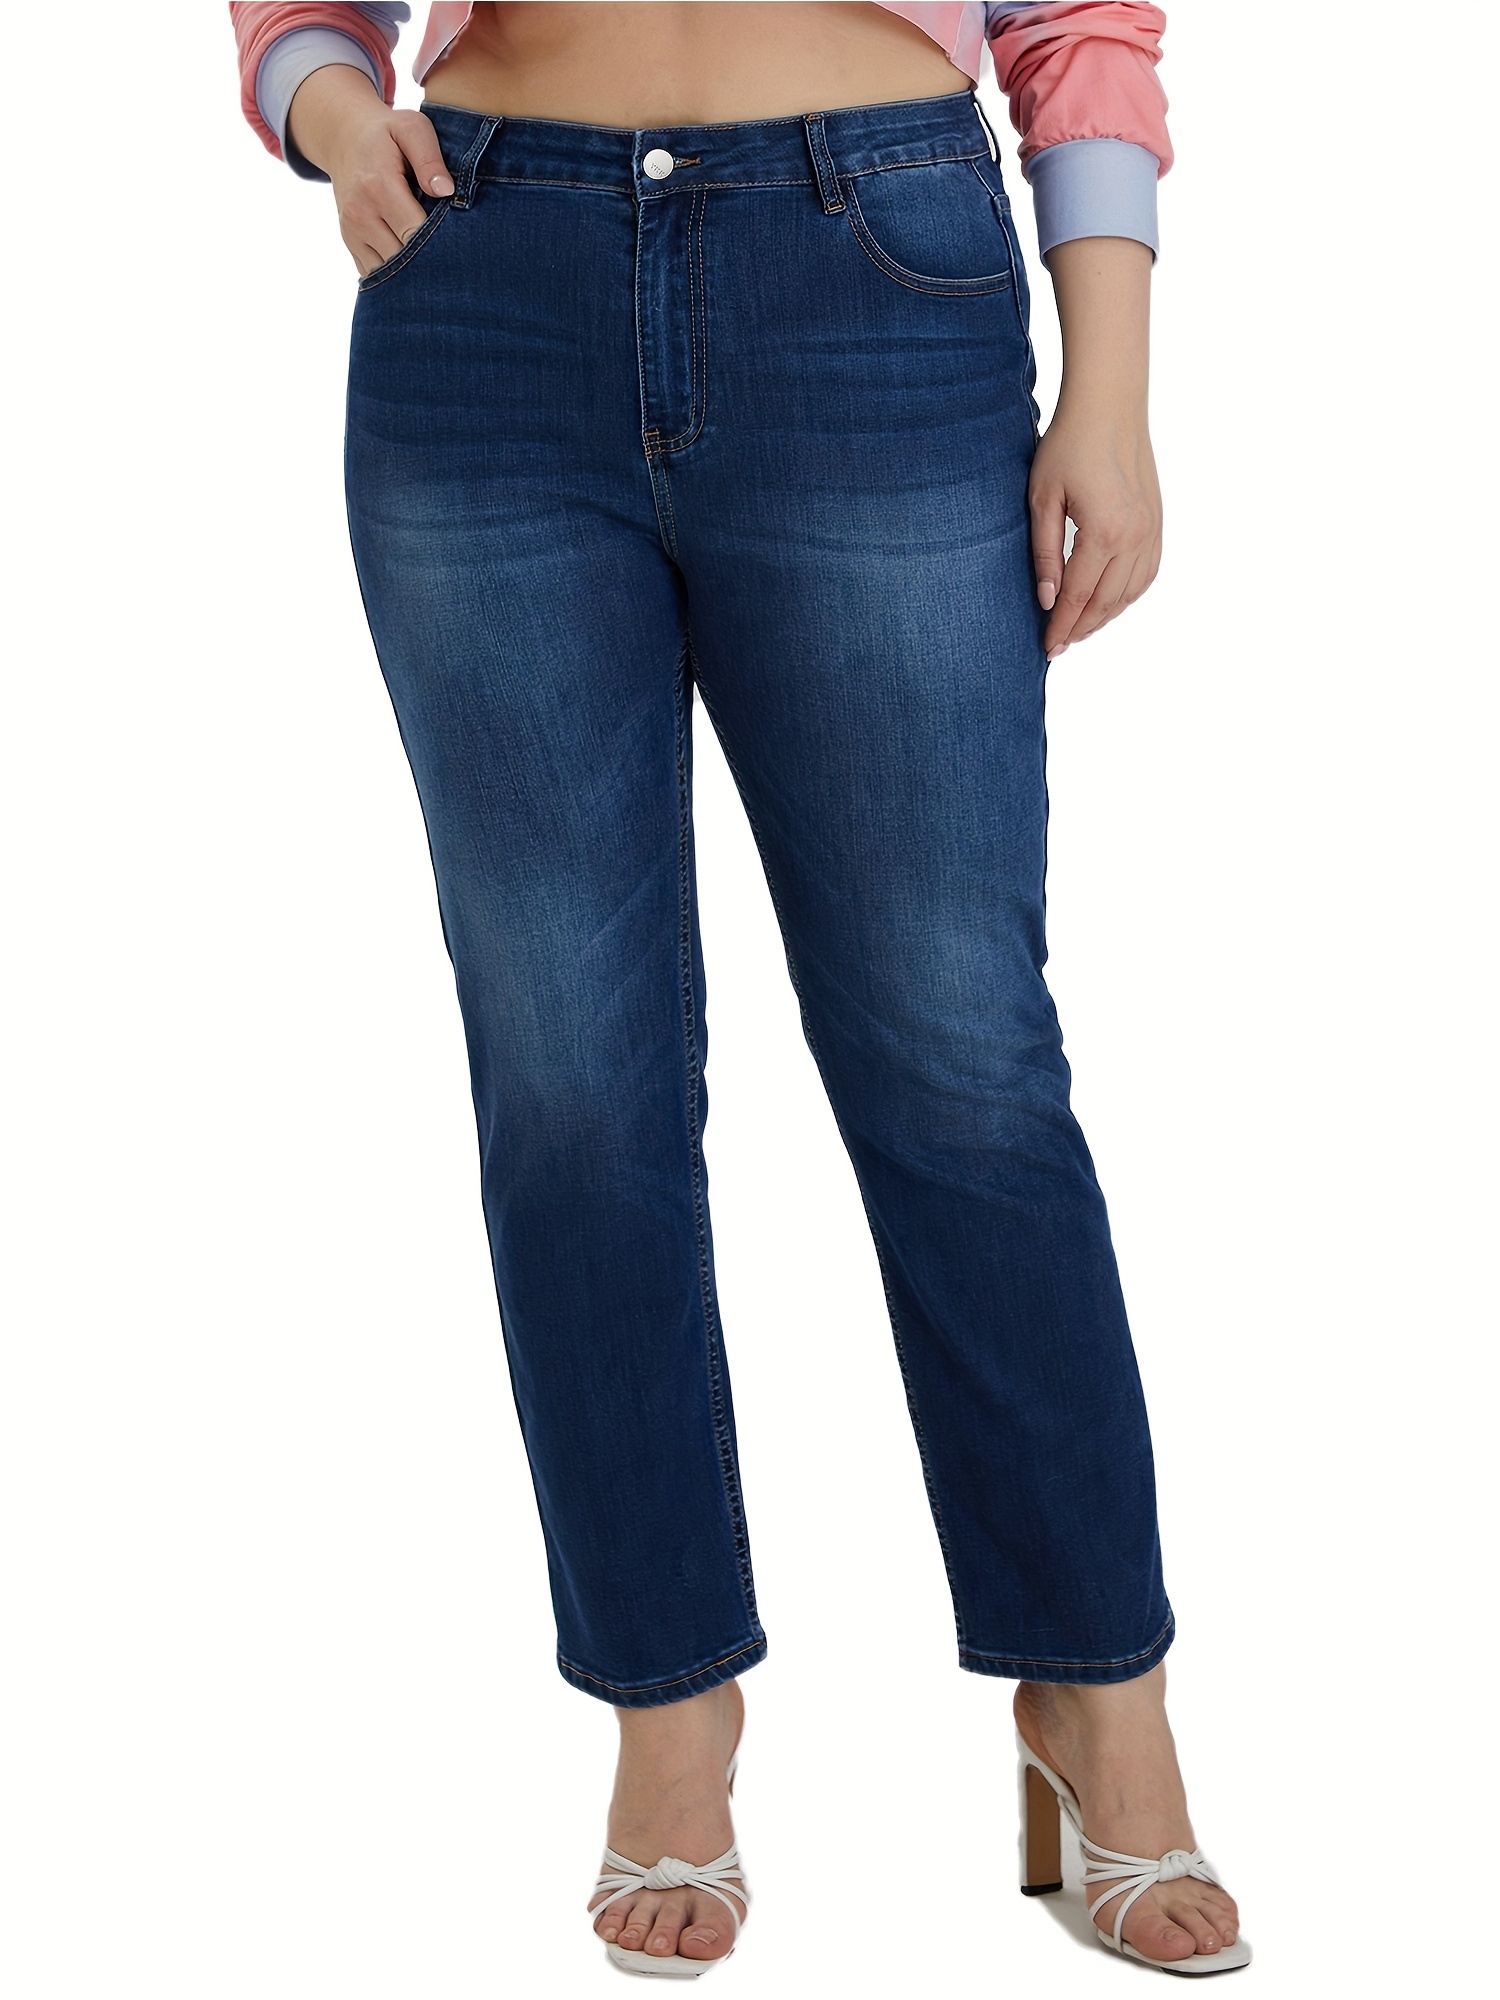 Plus Size Casual Jeans, Women's Plus Washed Button Fly High Stretch  Straight Leg Jeans With Flap Pockets